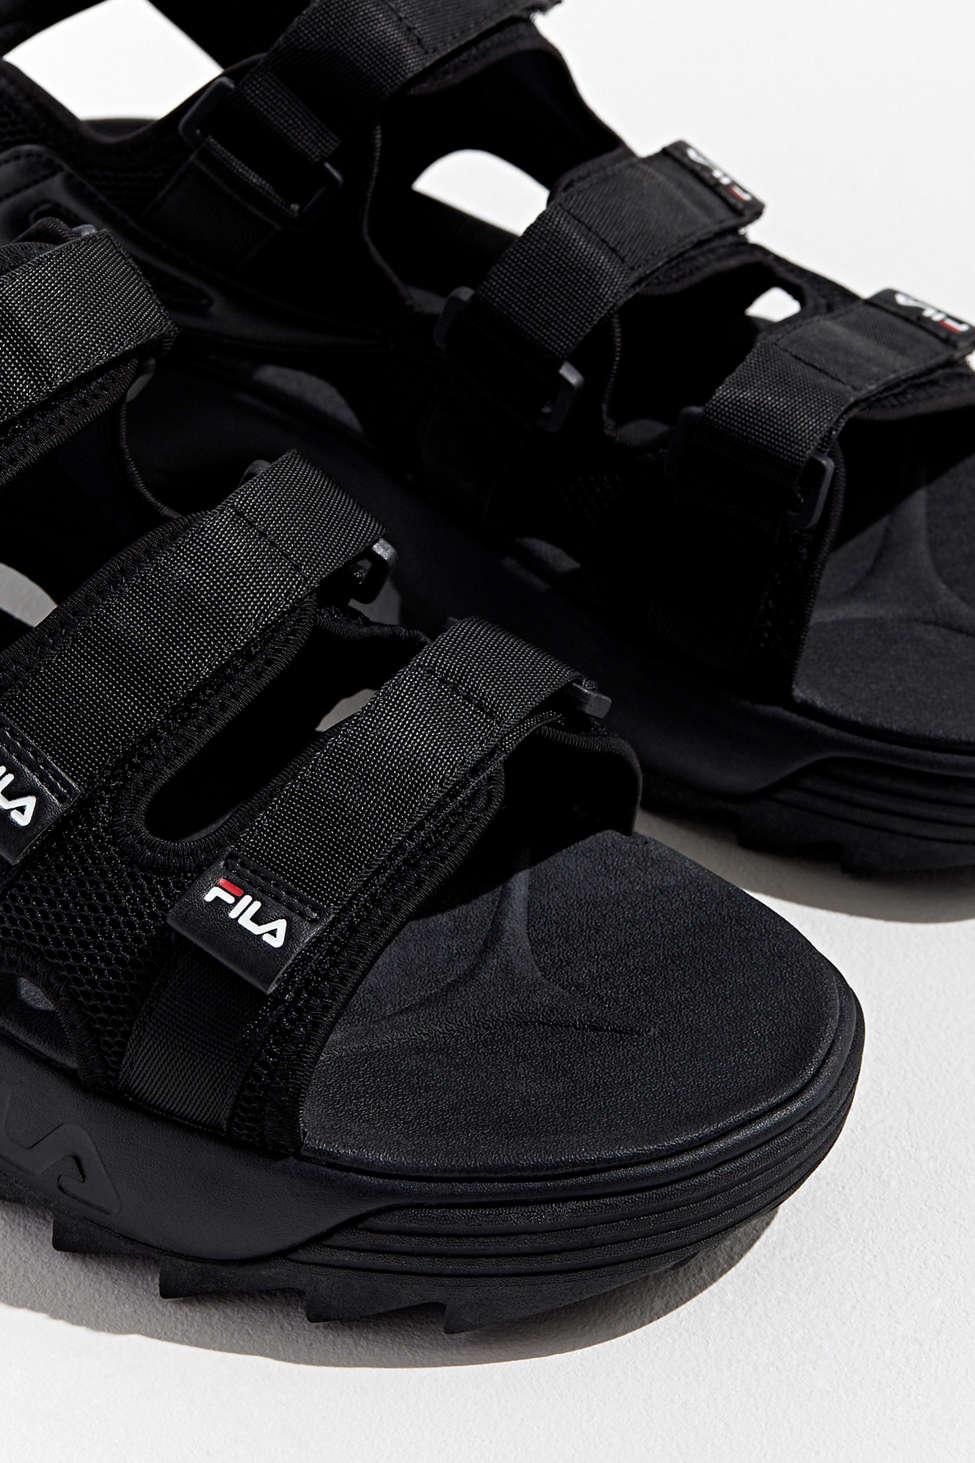 Fila Synthetic Uo Exclusive Disruptor Sandal in Black for Men - Lyst